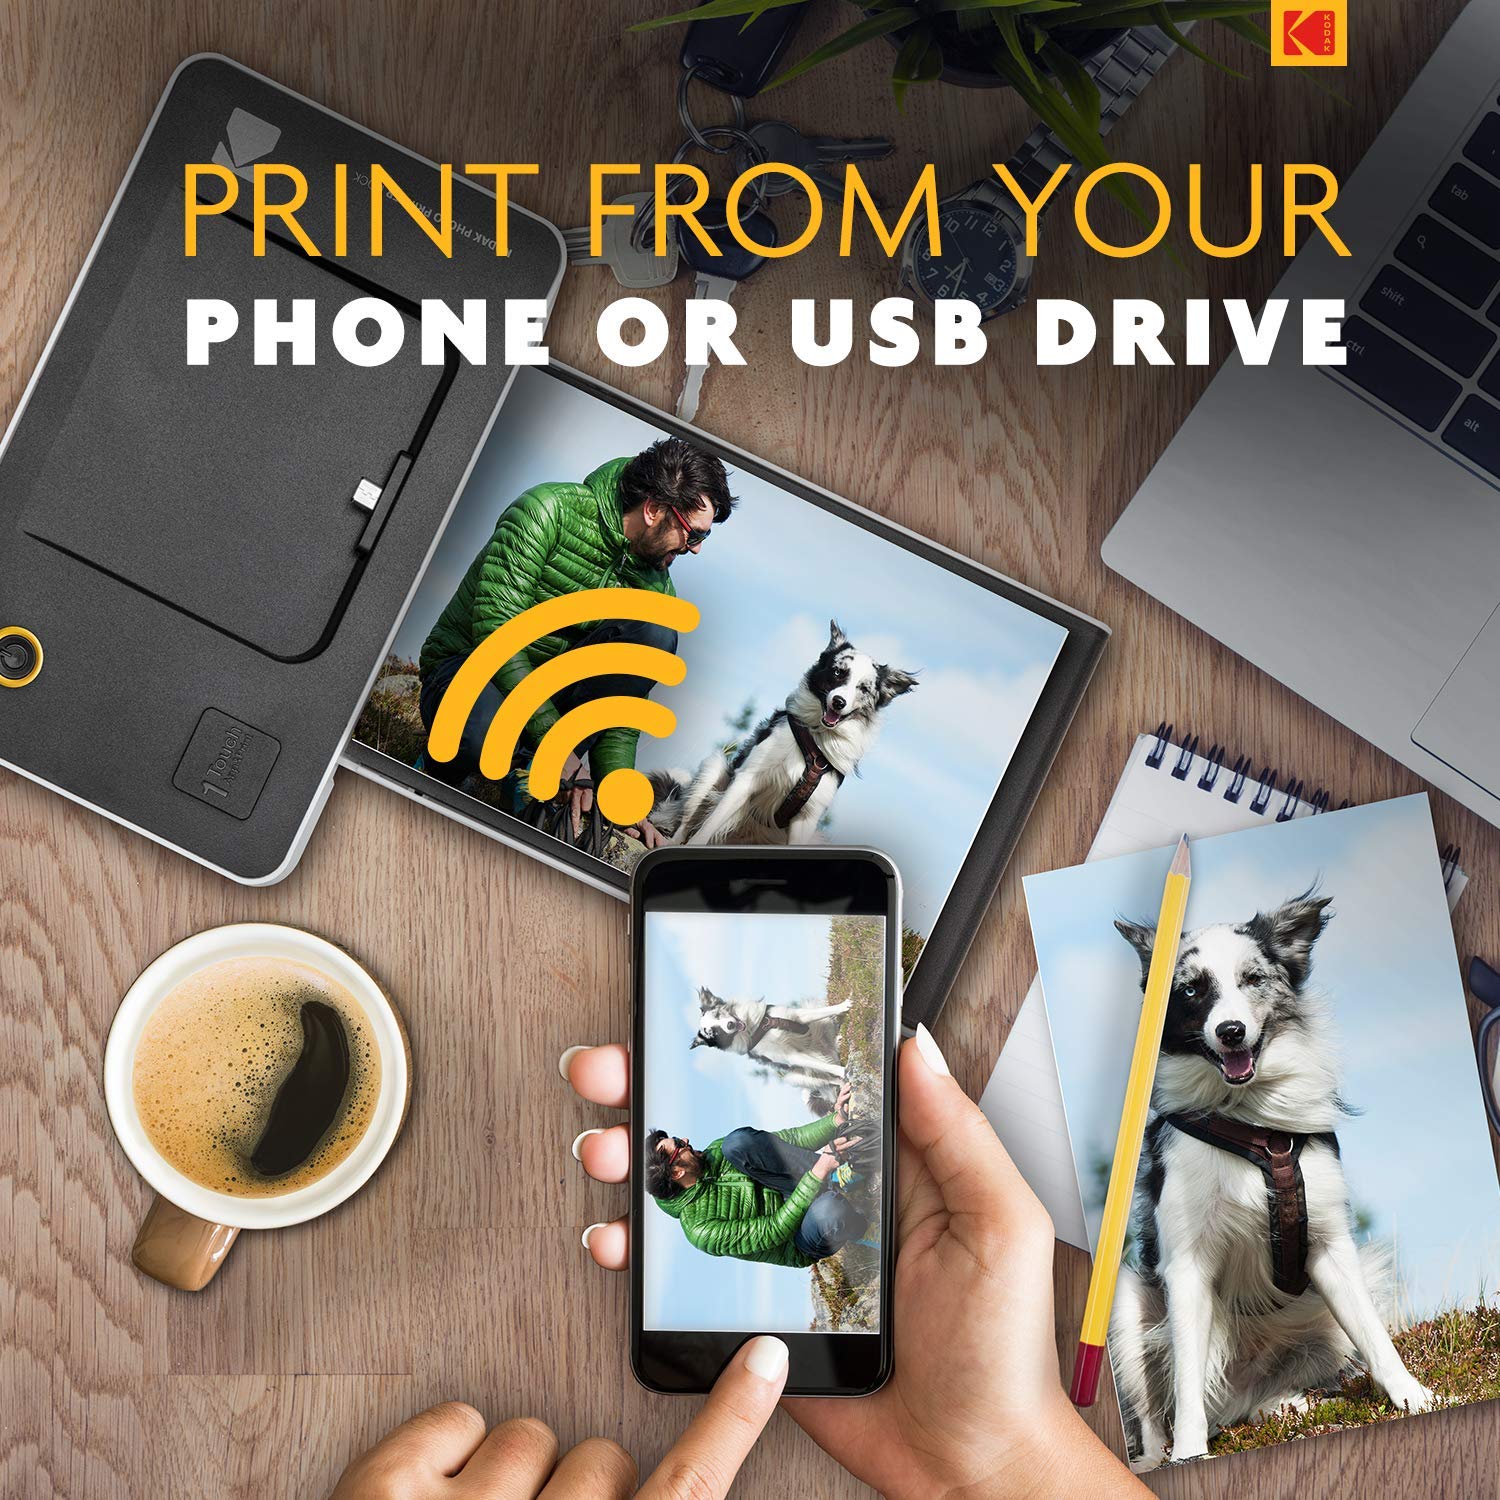 Kodak Dock & Wi-Fi Portable 4x6 Instant Photo Printer, Premium Quality Full Color Prints - Compatible w/iOS & Android Devices - image 5 of 11